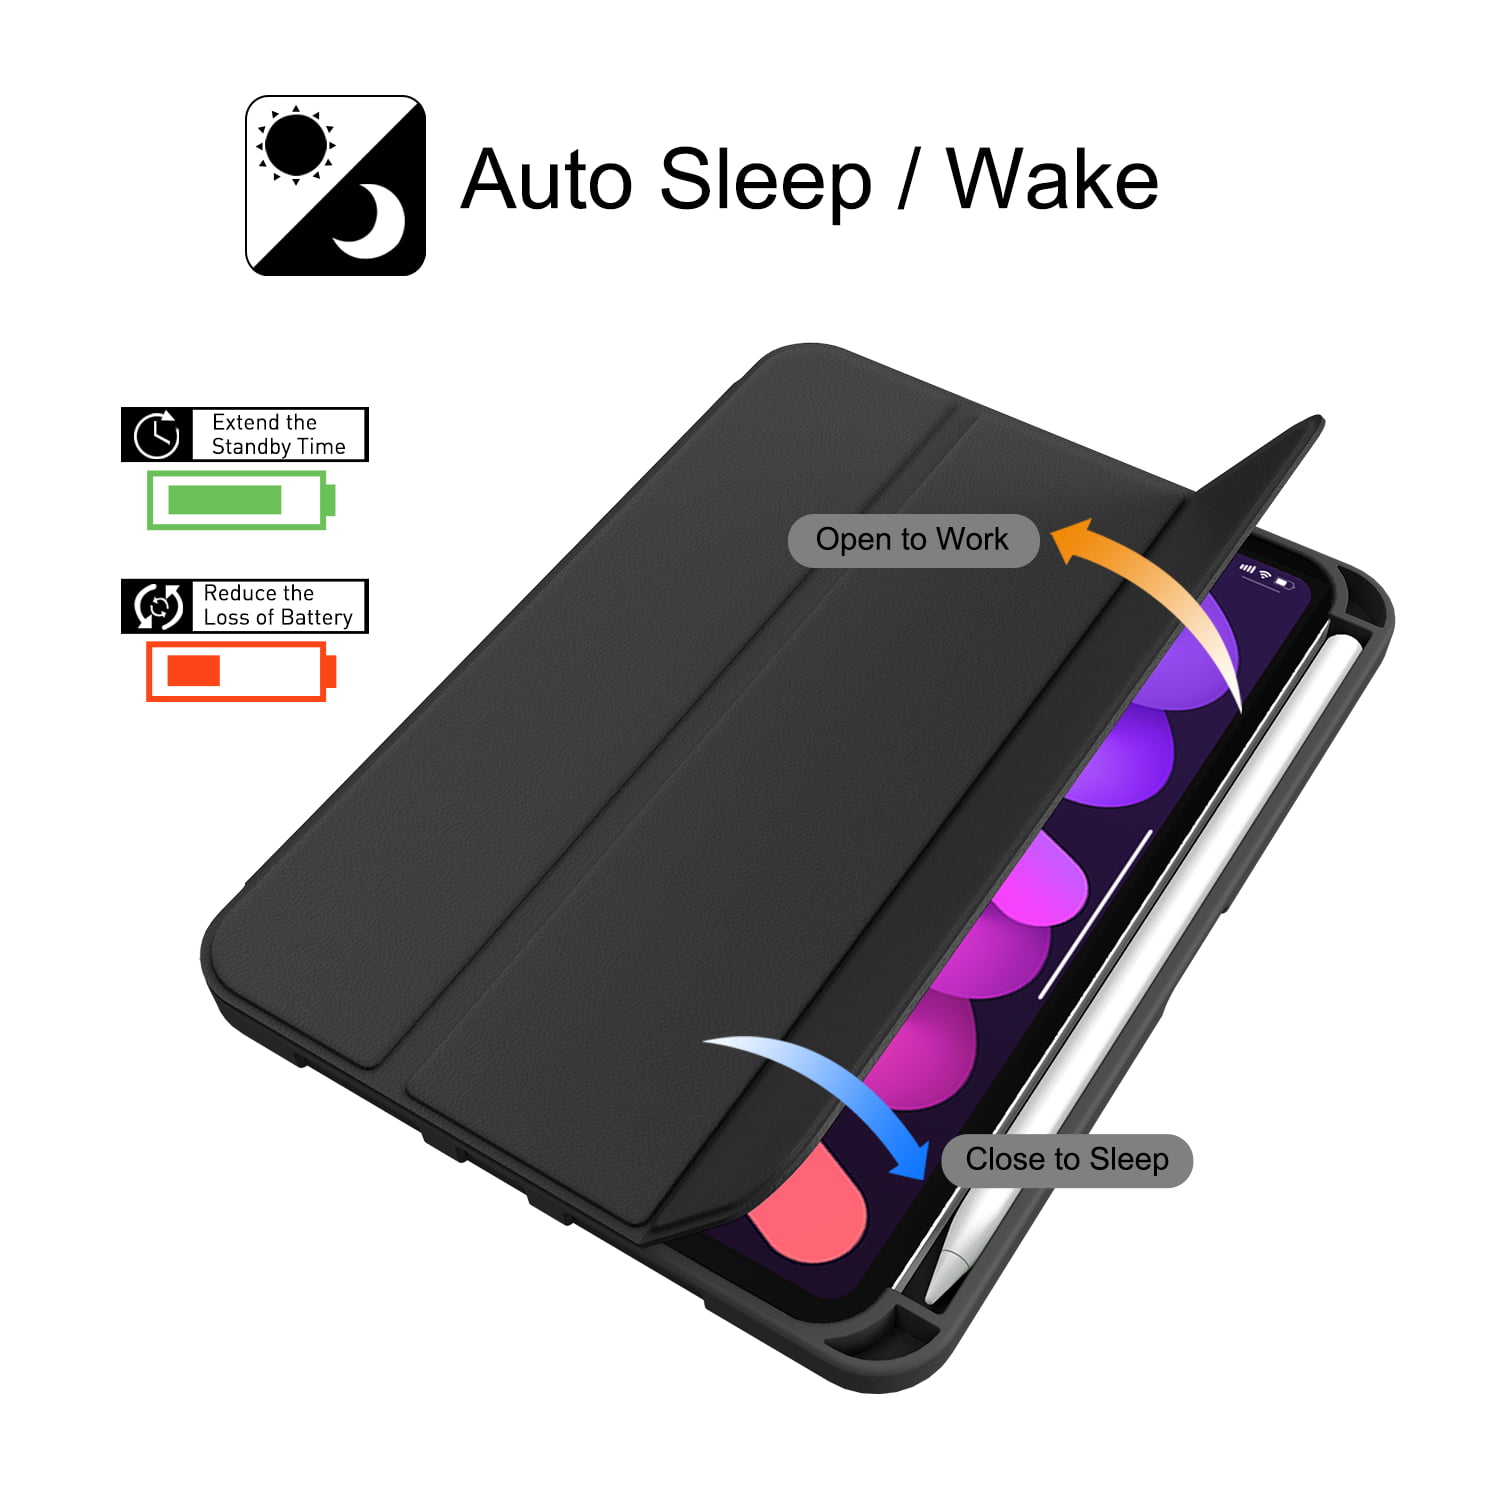 Soft TPU Back Cover for iPad Mini 6th Gen 8.3 inch Black Soke iPad Mini 6 Case 2021 6th Generation with Pencil Holder- Shockproof Protection + 2nd Gen Apple Pencil Charge + Auto Sleep/Wake 